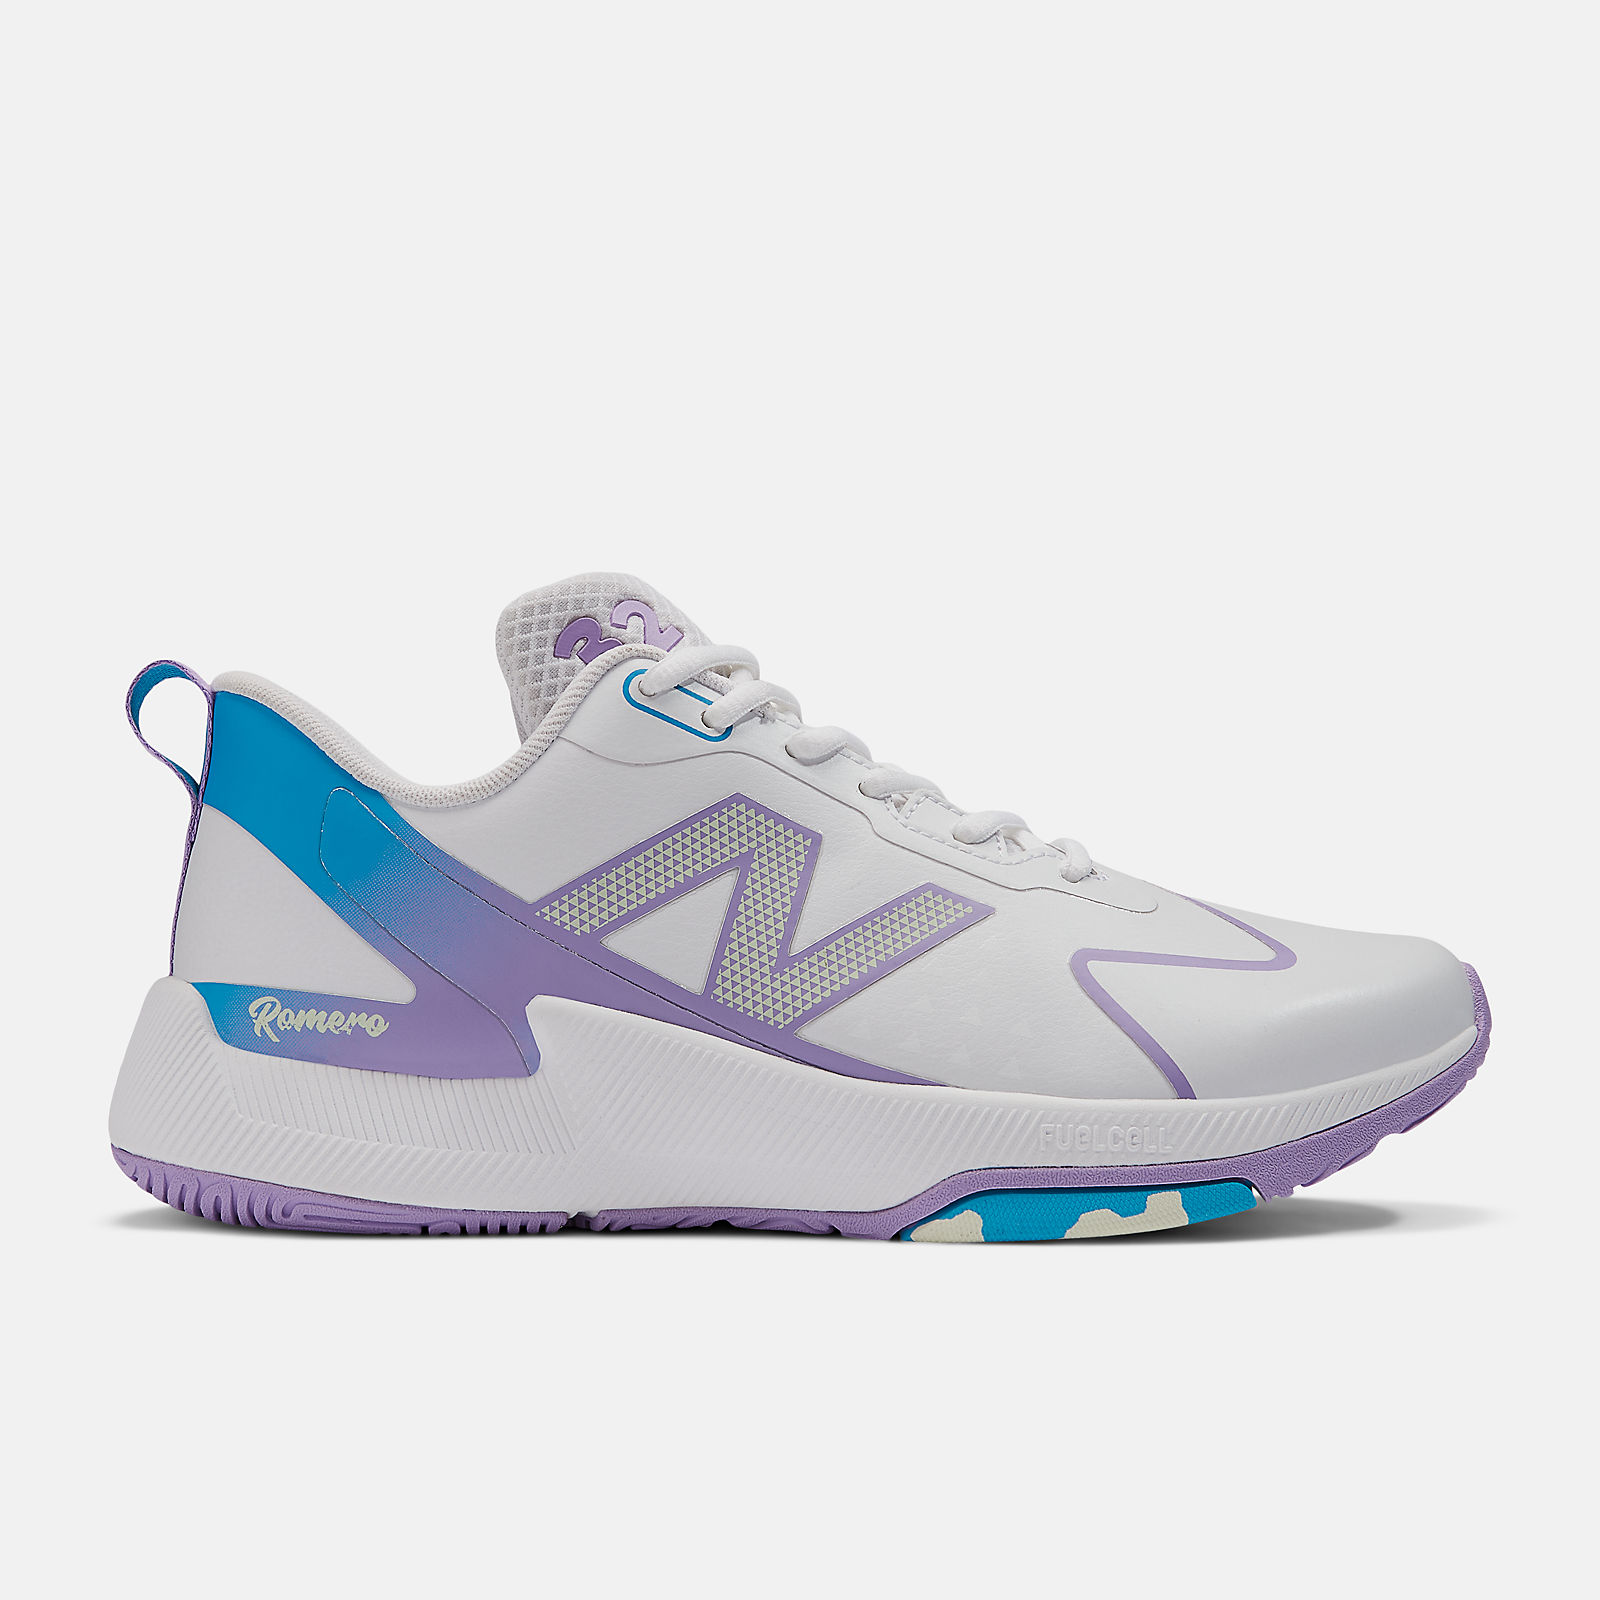 New Balance FuelCell Romero Duo Trainer Unity of Sport